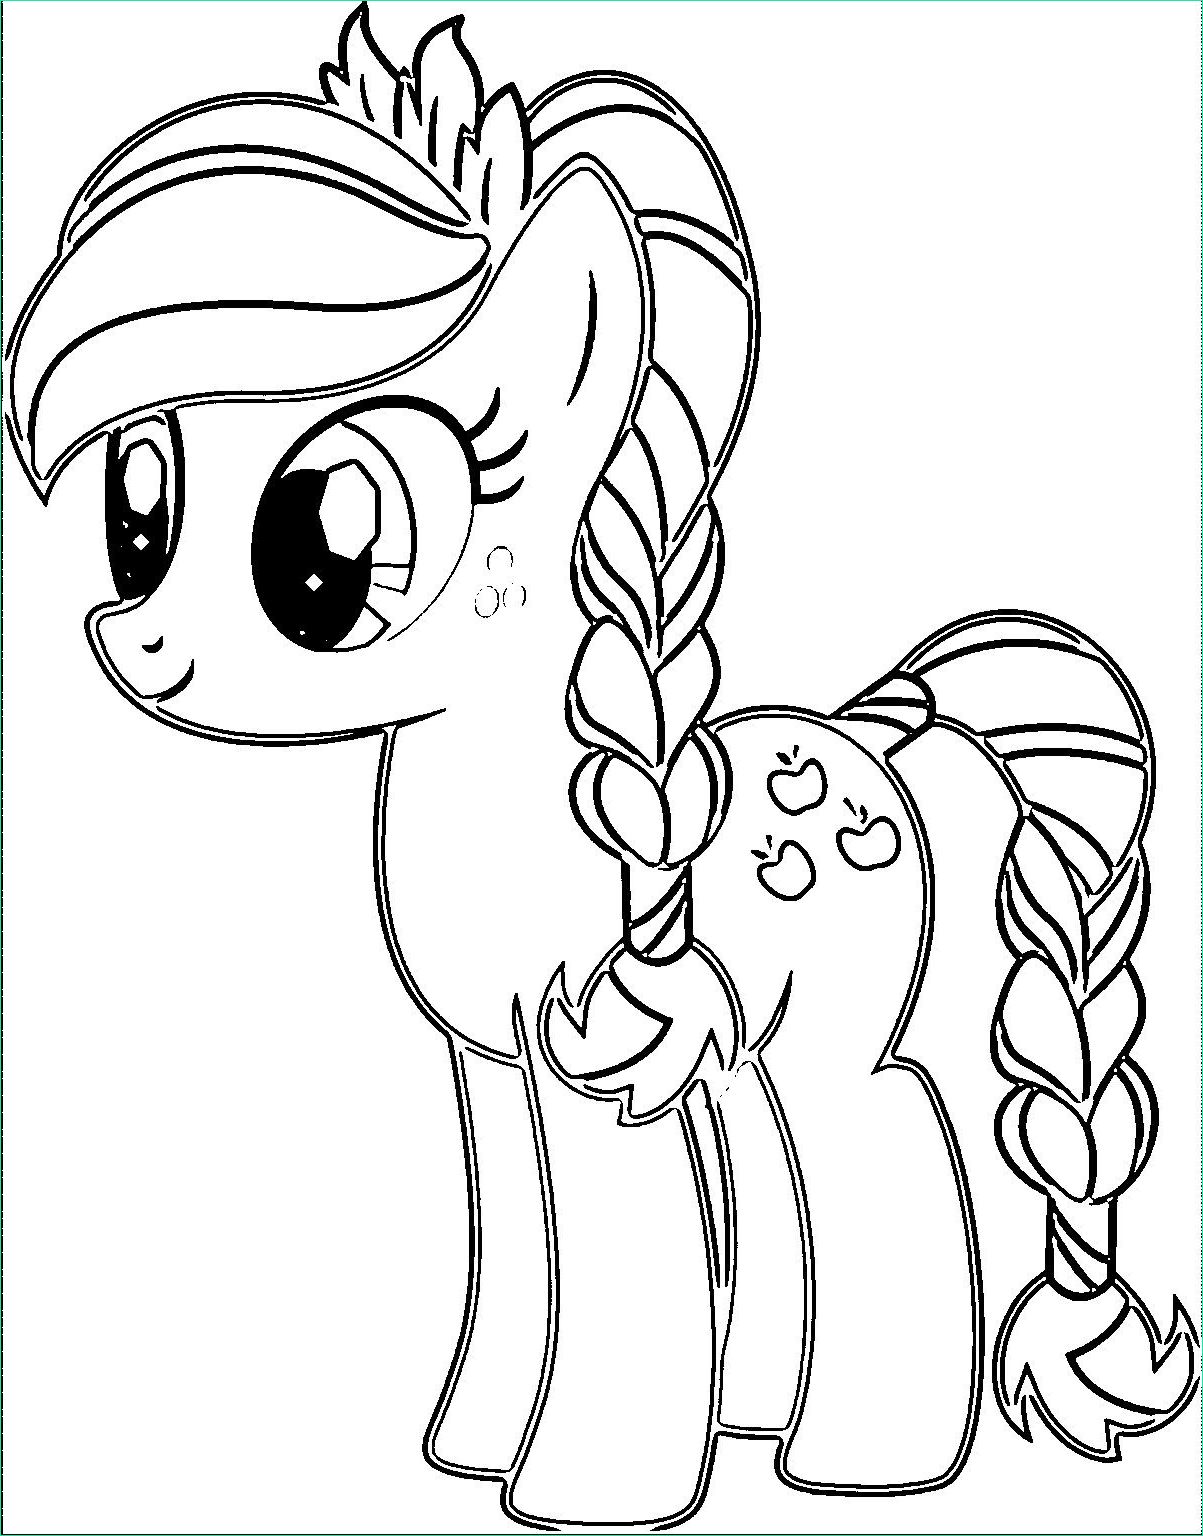 Coloriage My Little Pony Élégant Image Halloween My Little Pony Coloring Pages Inerletboo